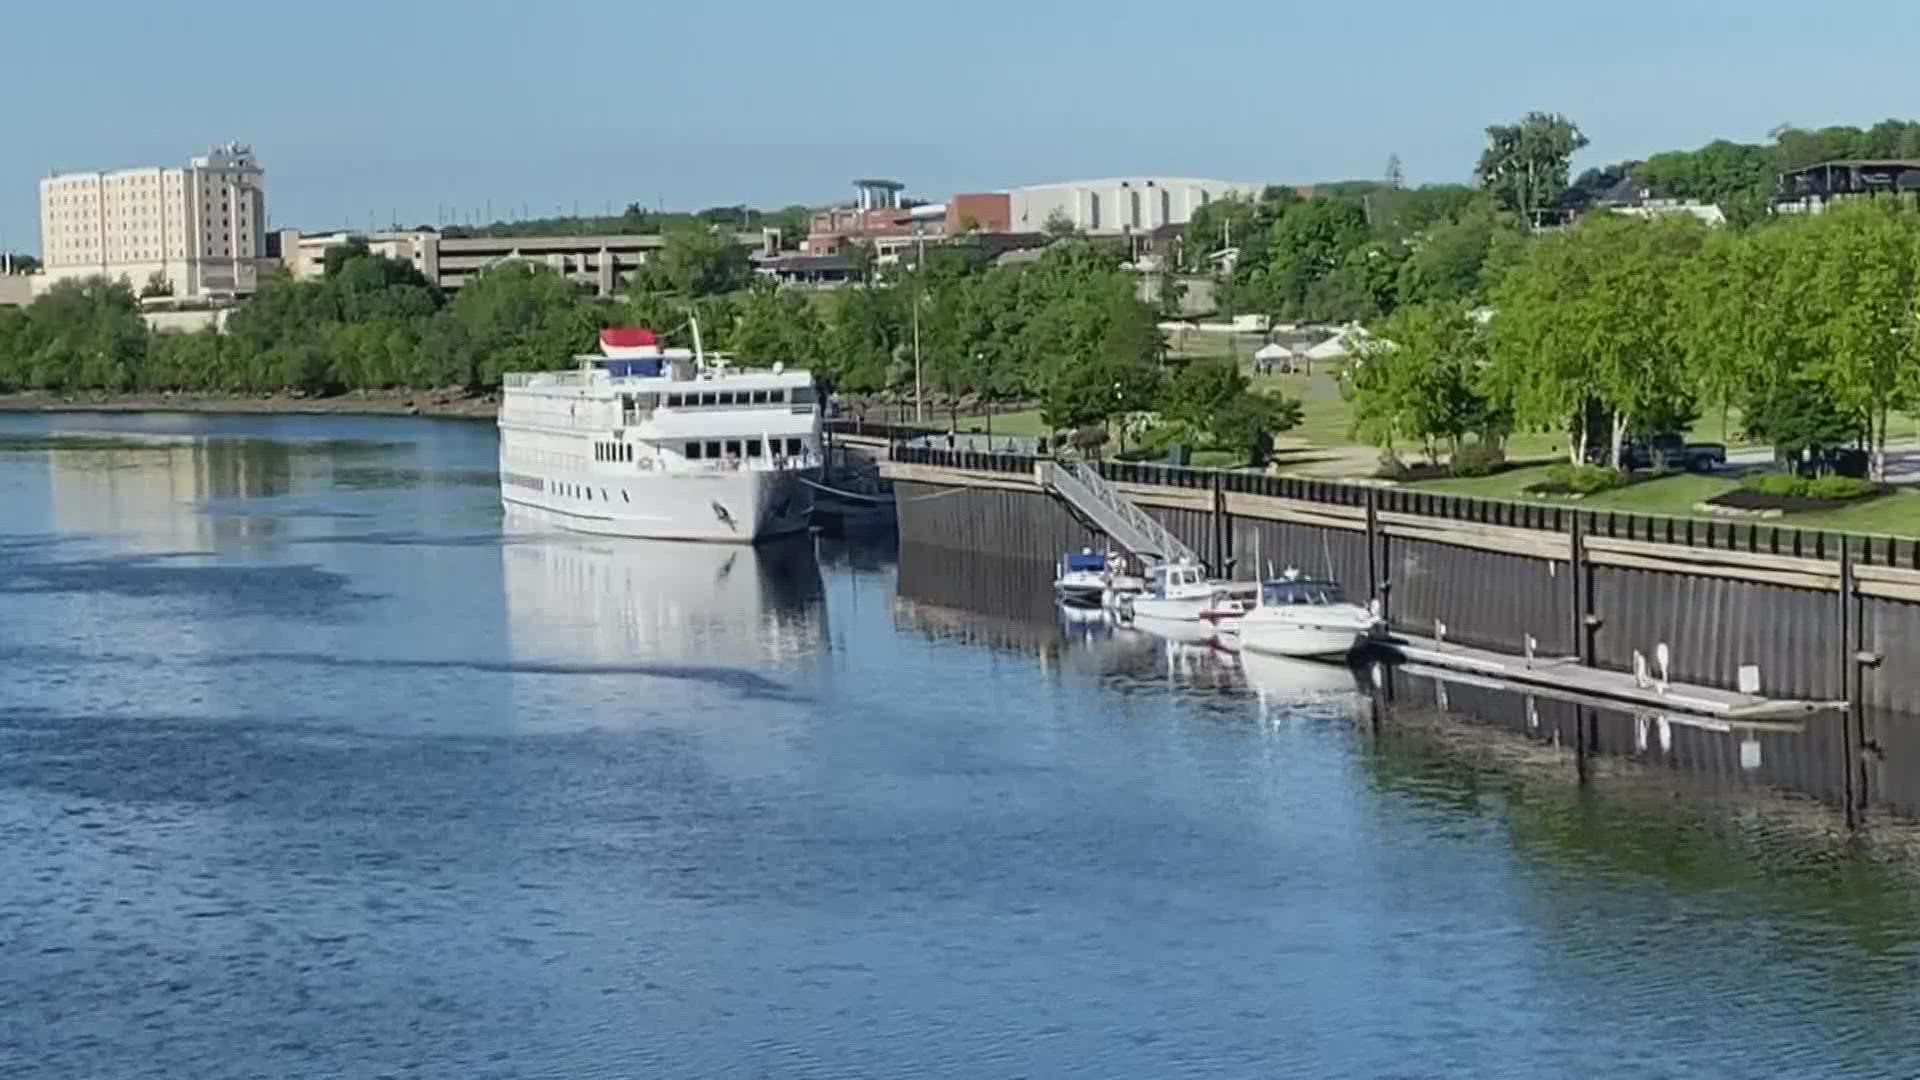 Bangor is hosting cruise ships again following city council approval of a lease on the waterfront.